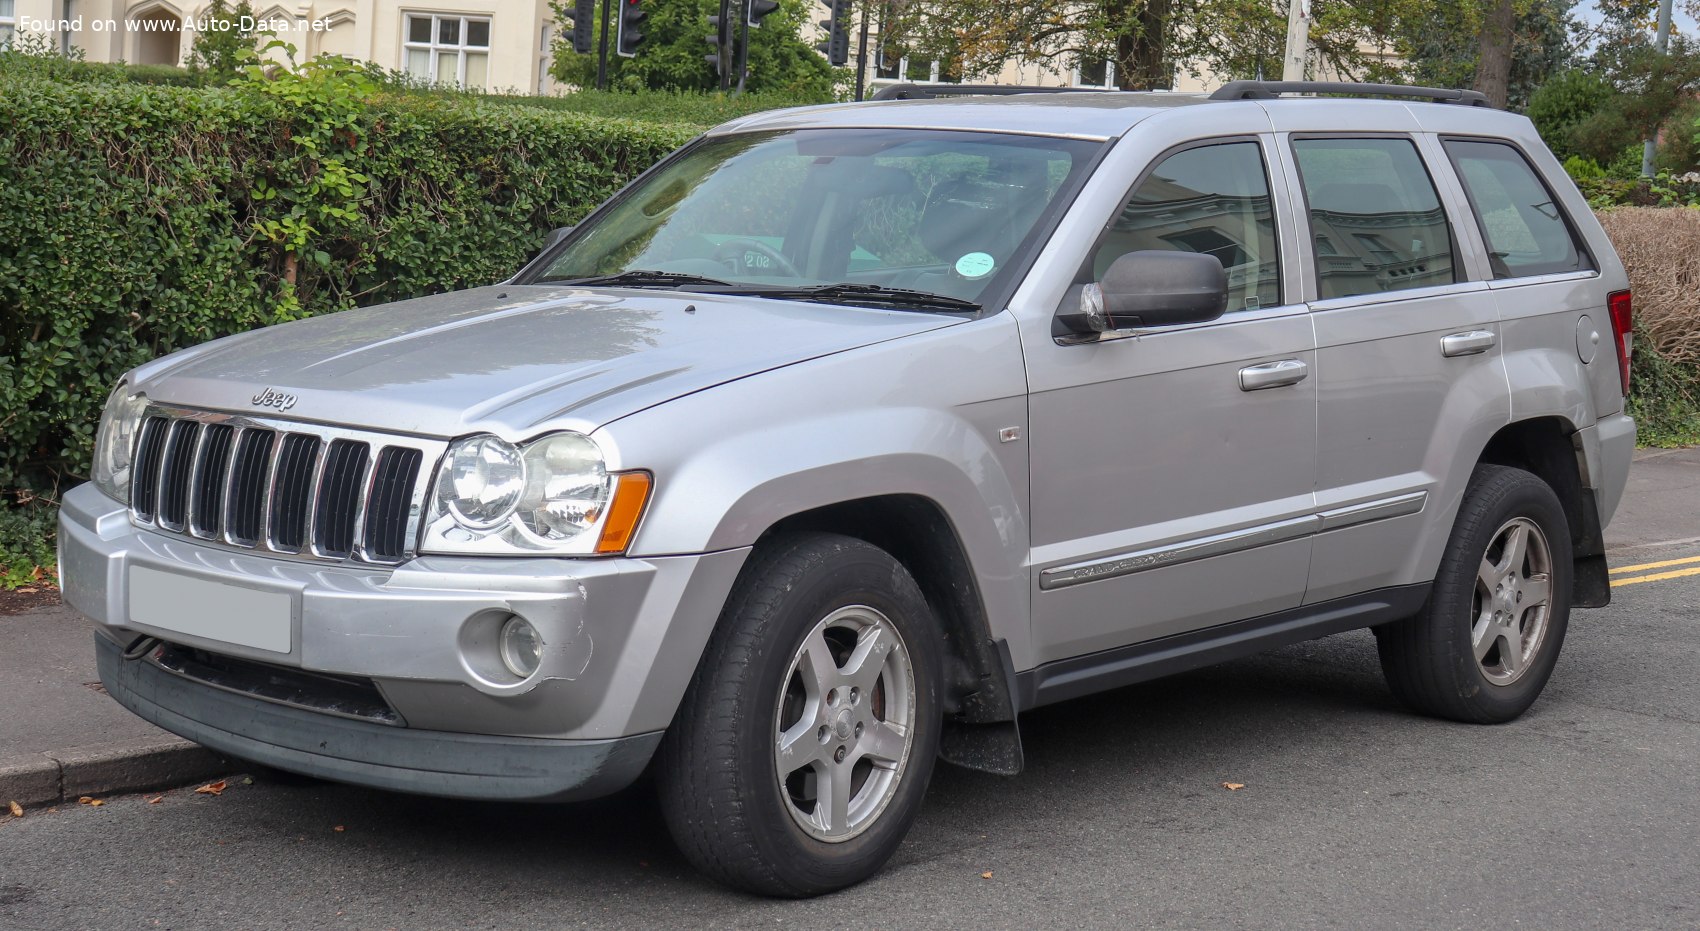 2005 Jeep Grand Cherokee III (WK) 3.7i V6 (214 Hp) 4WD Automatic |  Technical specs, data, fuel consumption, Dimensions